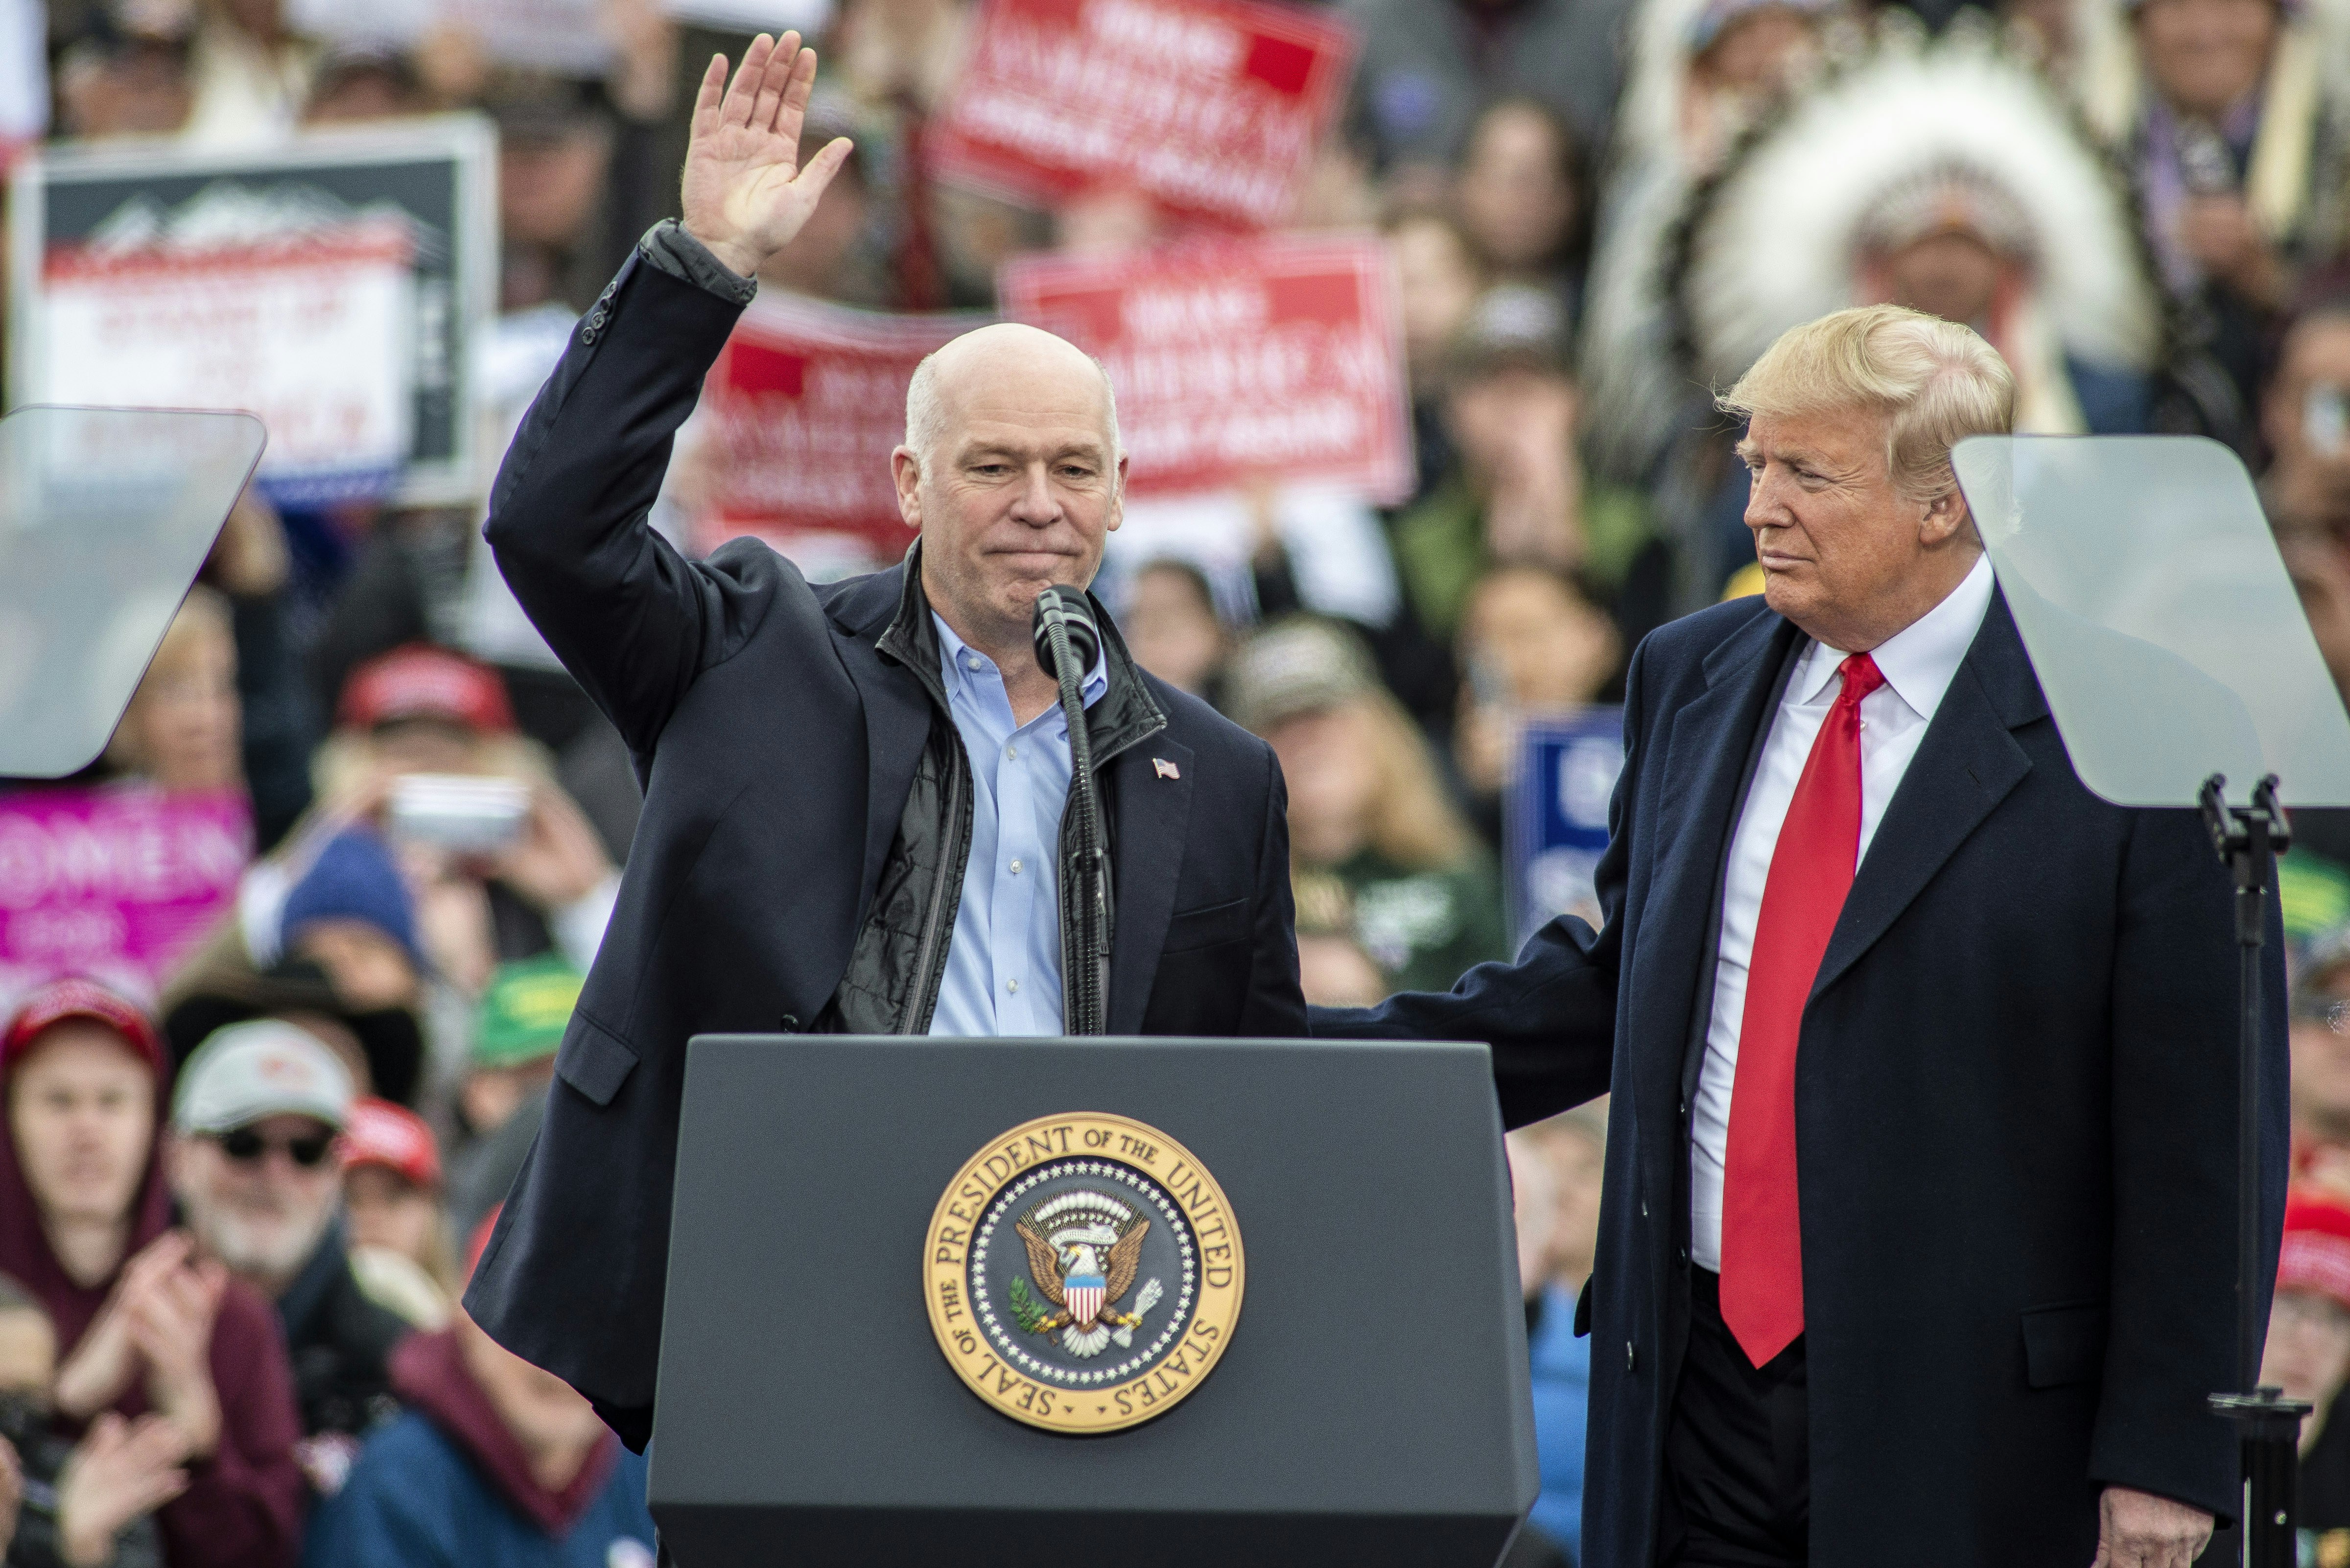 BELGRADE, MT - NOVEMBER 03: Rep. Greg Gianforte (R-MT) joins President Donald Trump at a "Make America Great Again" rally at the Bozeman Yellowstone International Airport on November 3, 2018 in Belgrade, Montana. (Photo by William Campbell/Corbis via Getty Images)